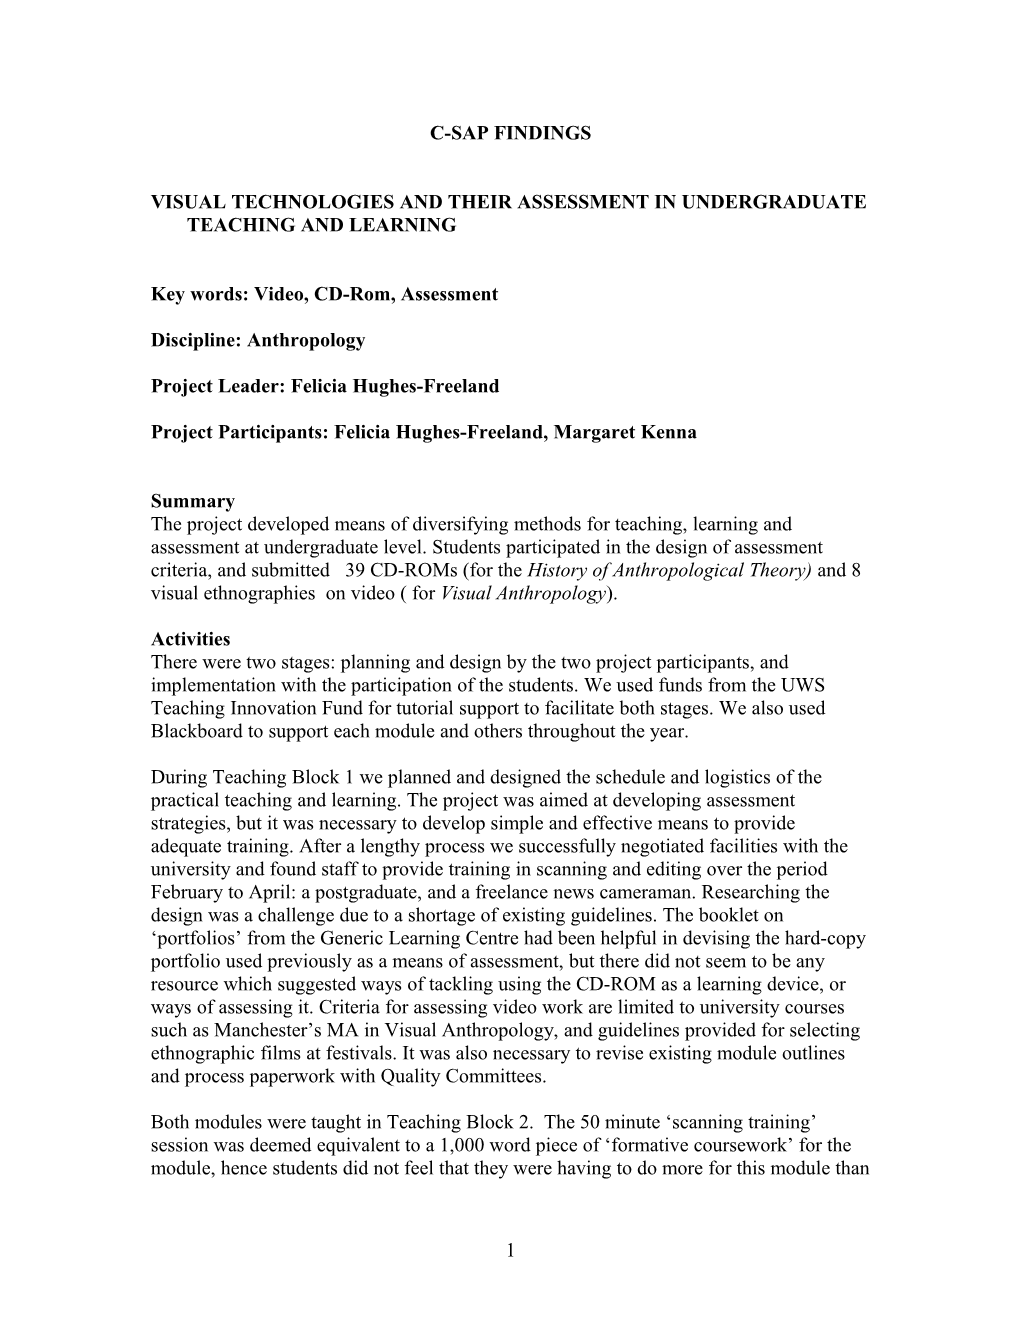 Visual Technologies and Their Assessment in Undergraduate Teaching and Learning